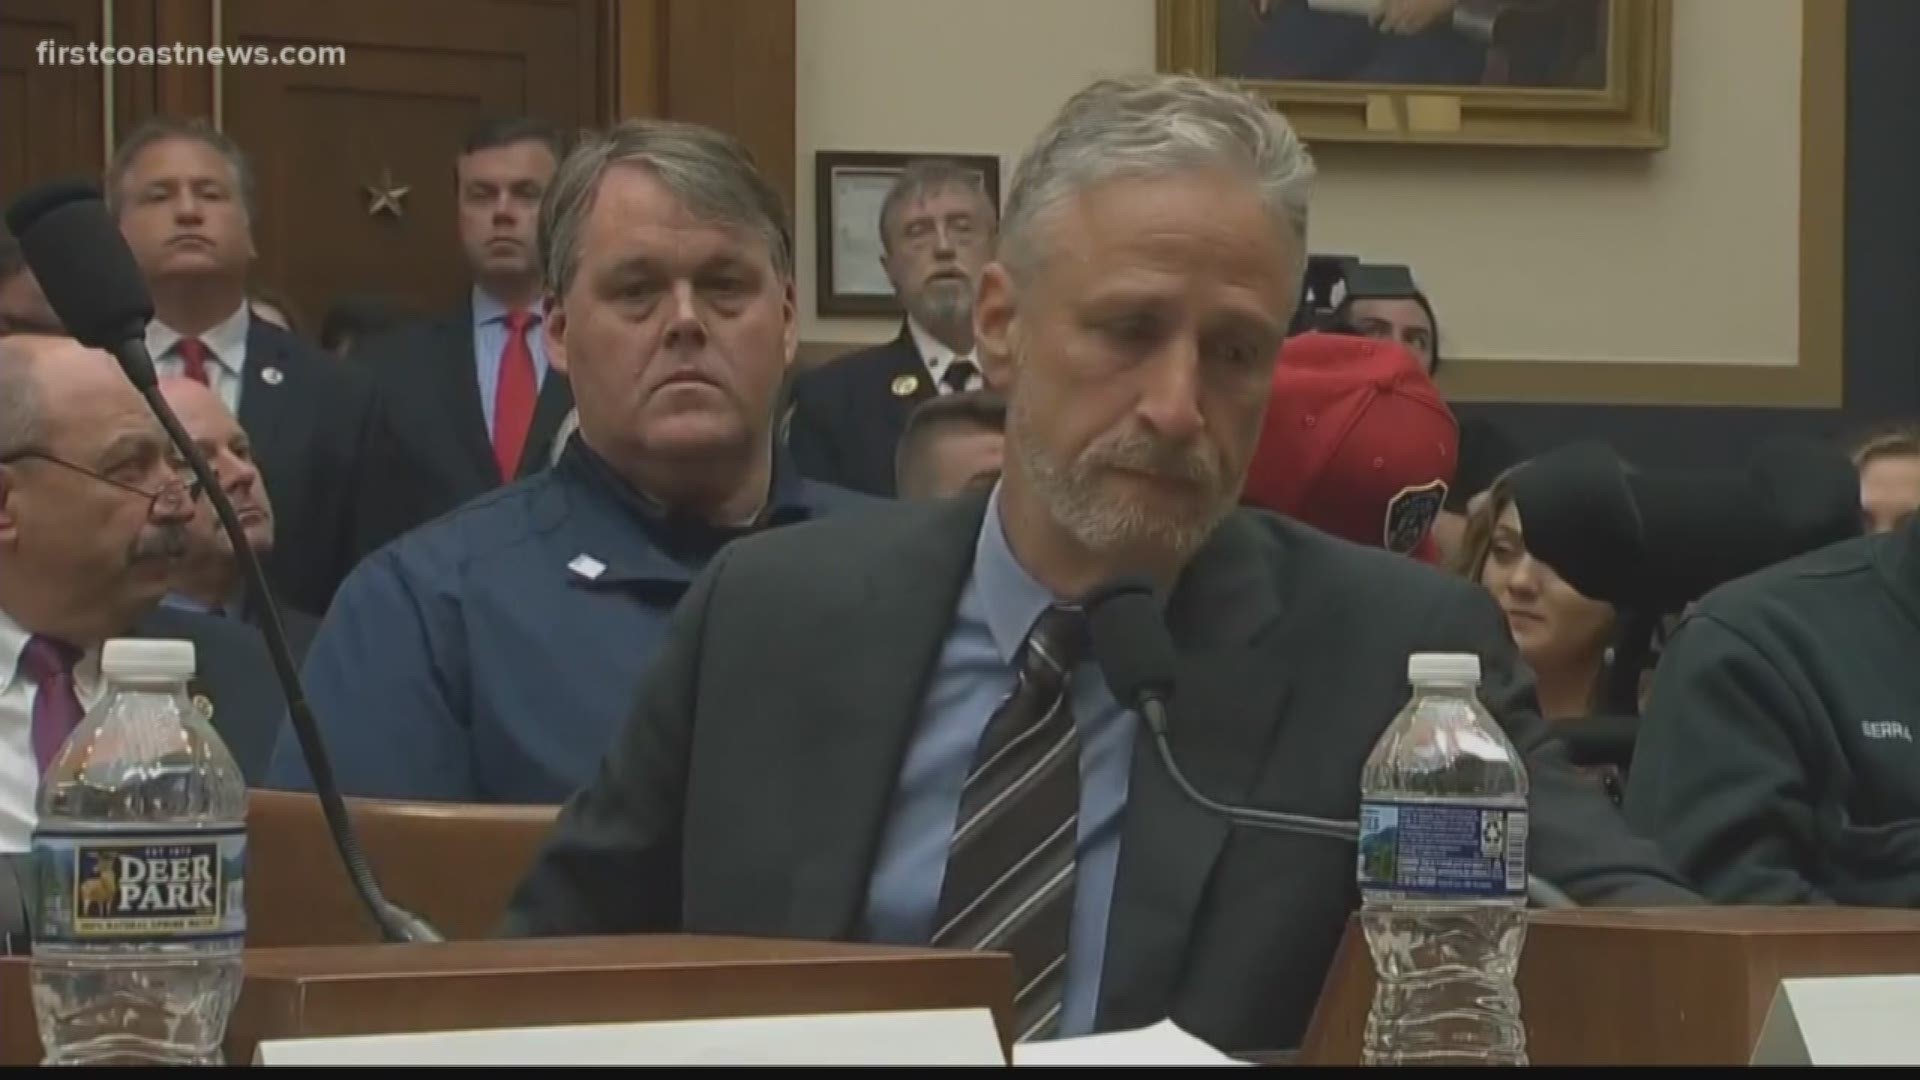 Stewart did not hold back in emotional testimony before Congress on behalf of 9/11 first responders.